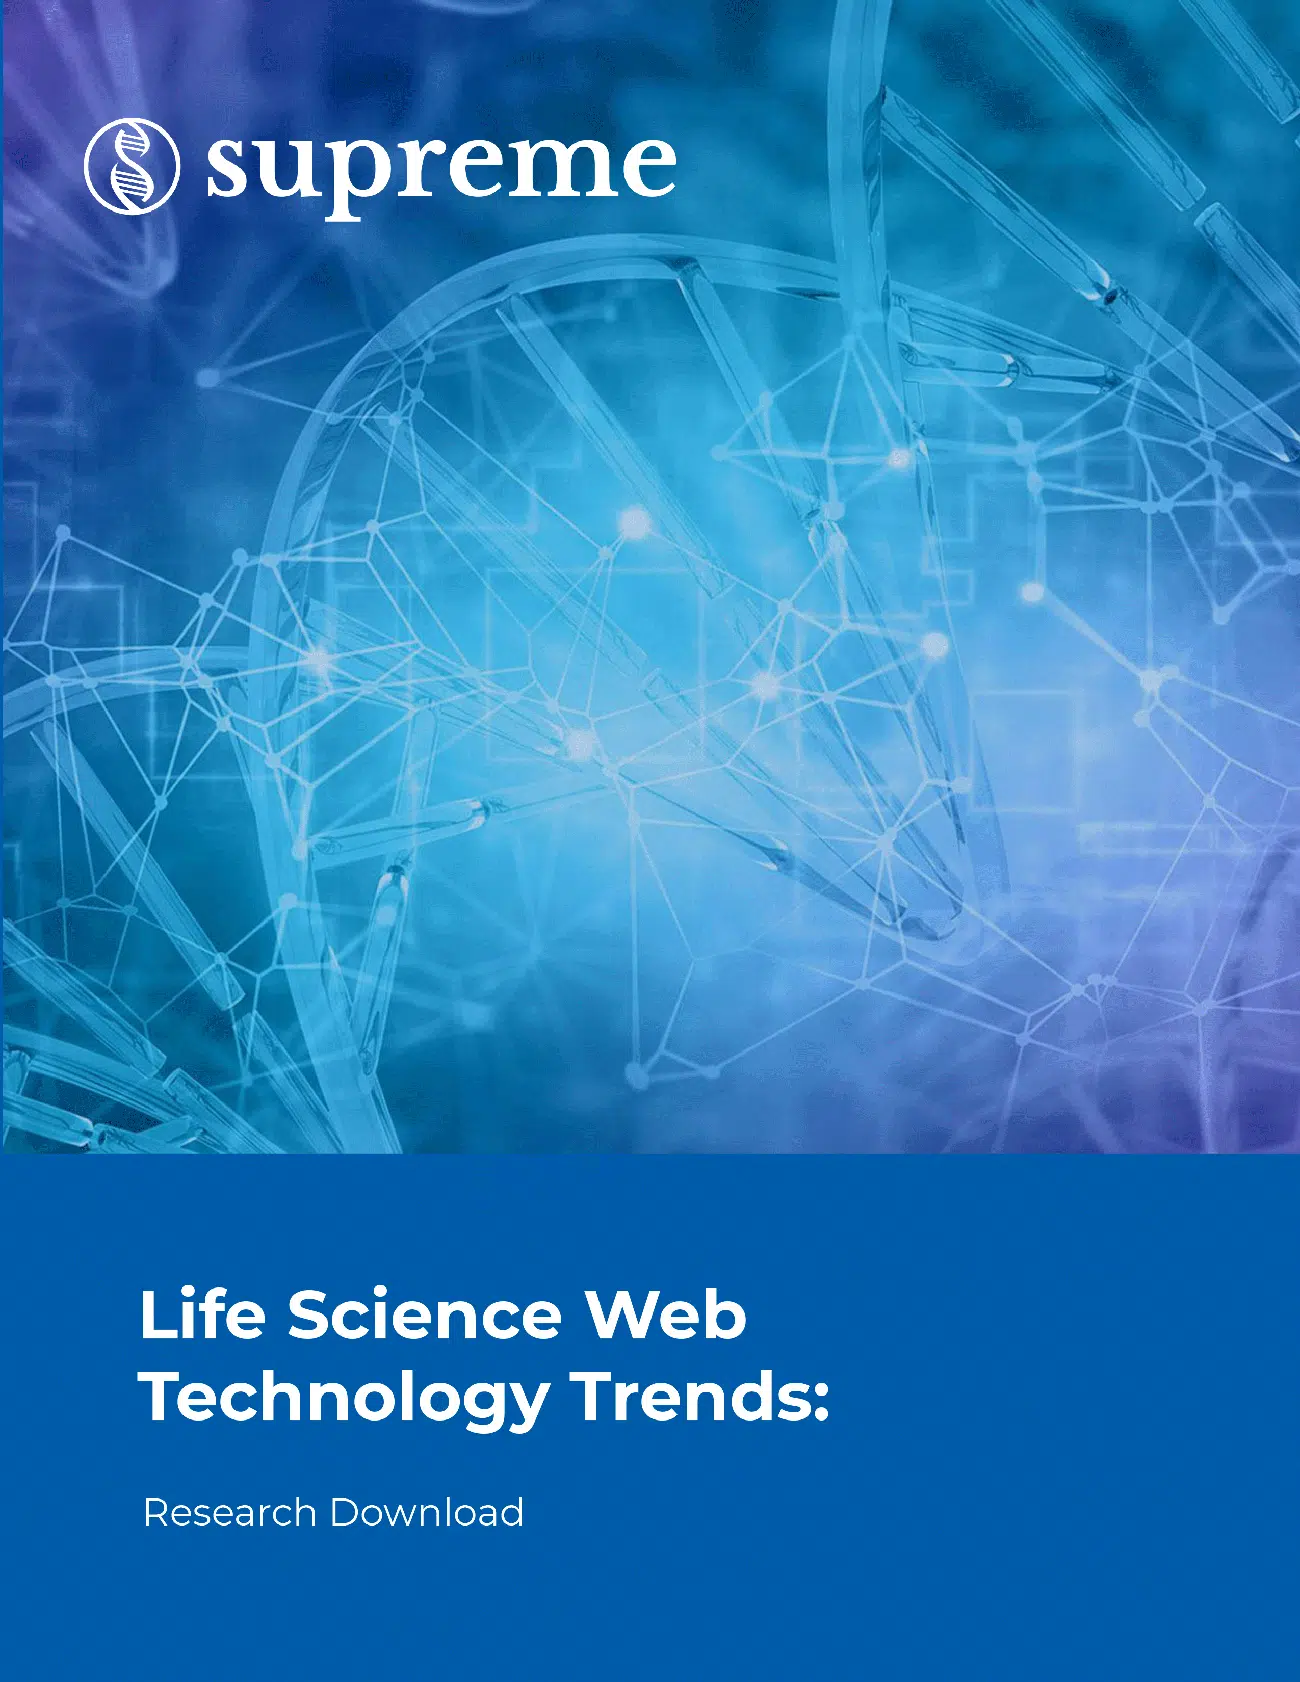 Life_Science_Web_Technology_Trends__Research_Download_-_Portrait-1